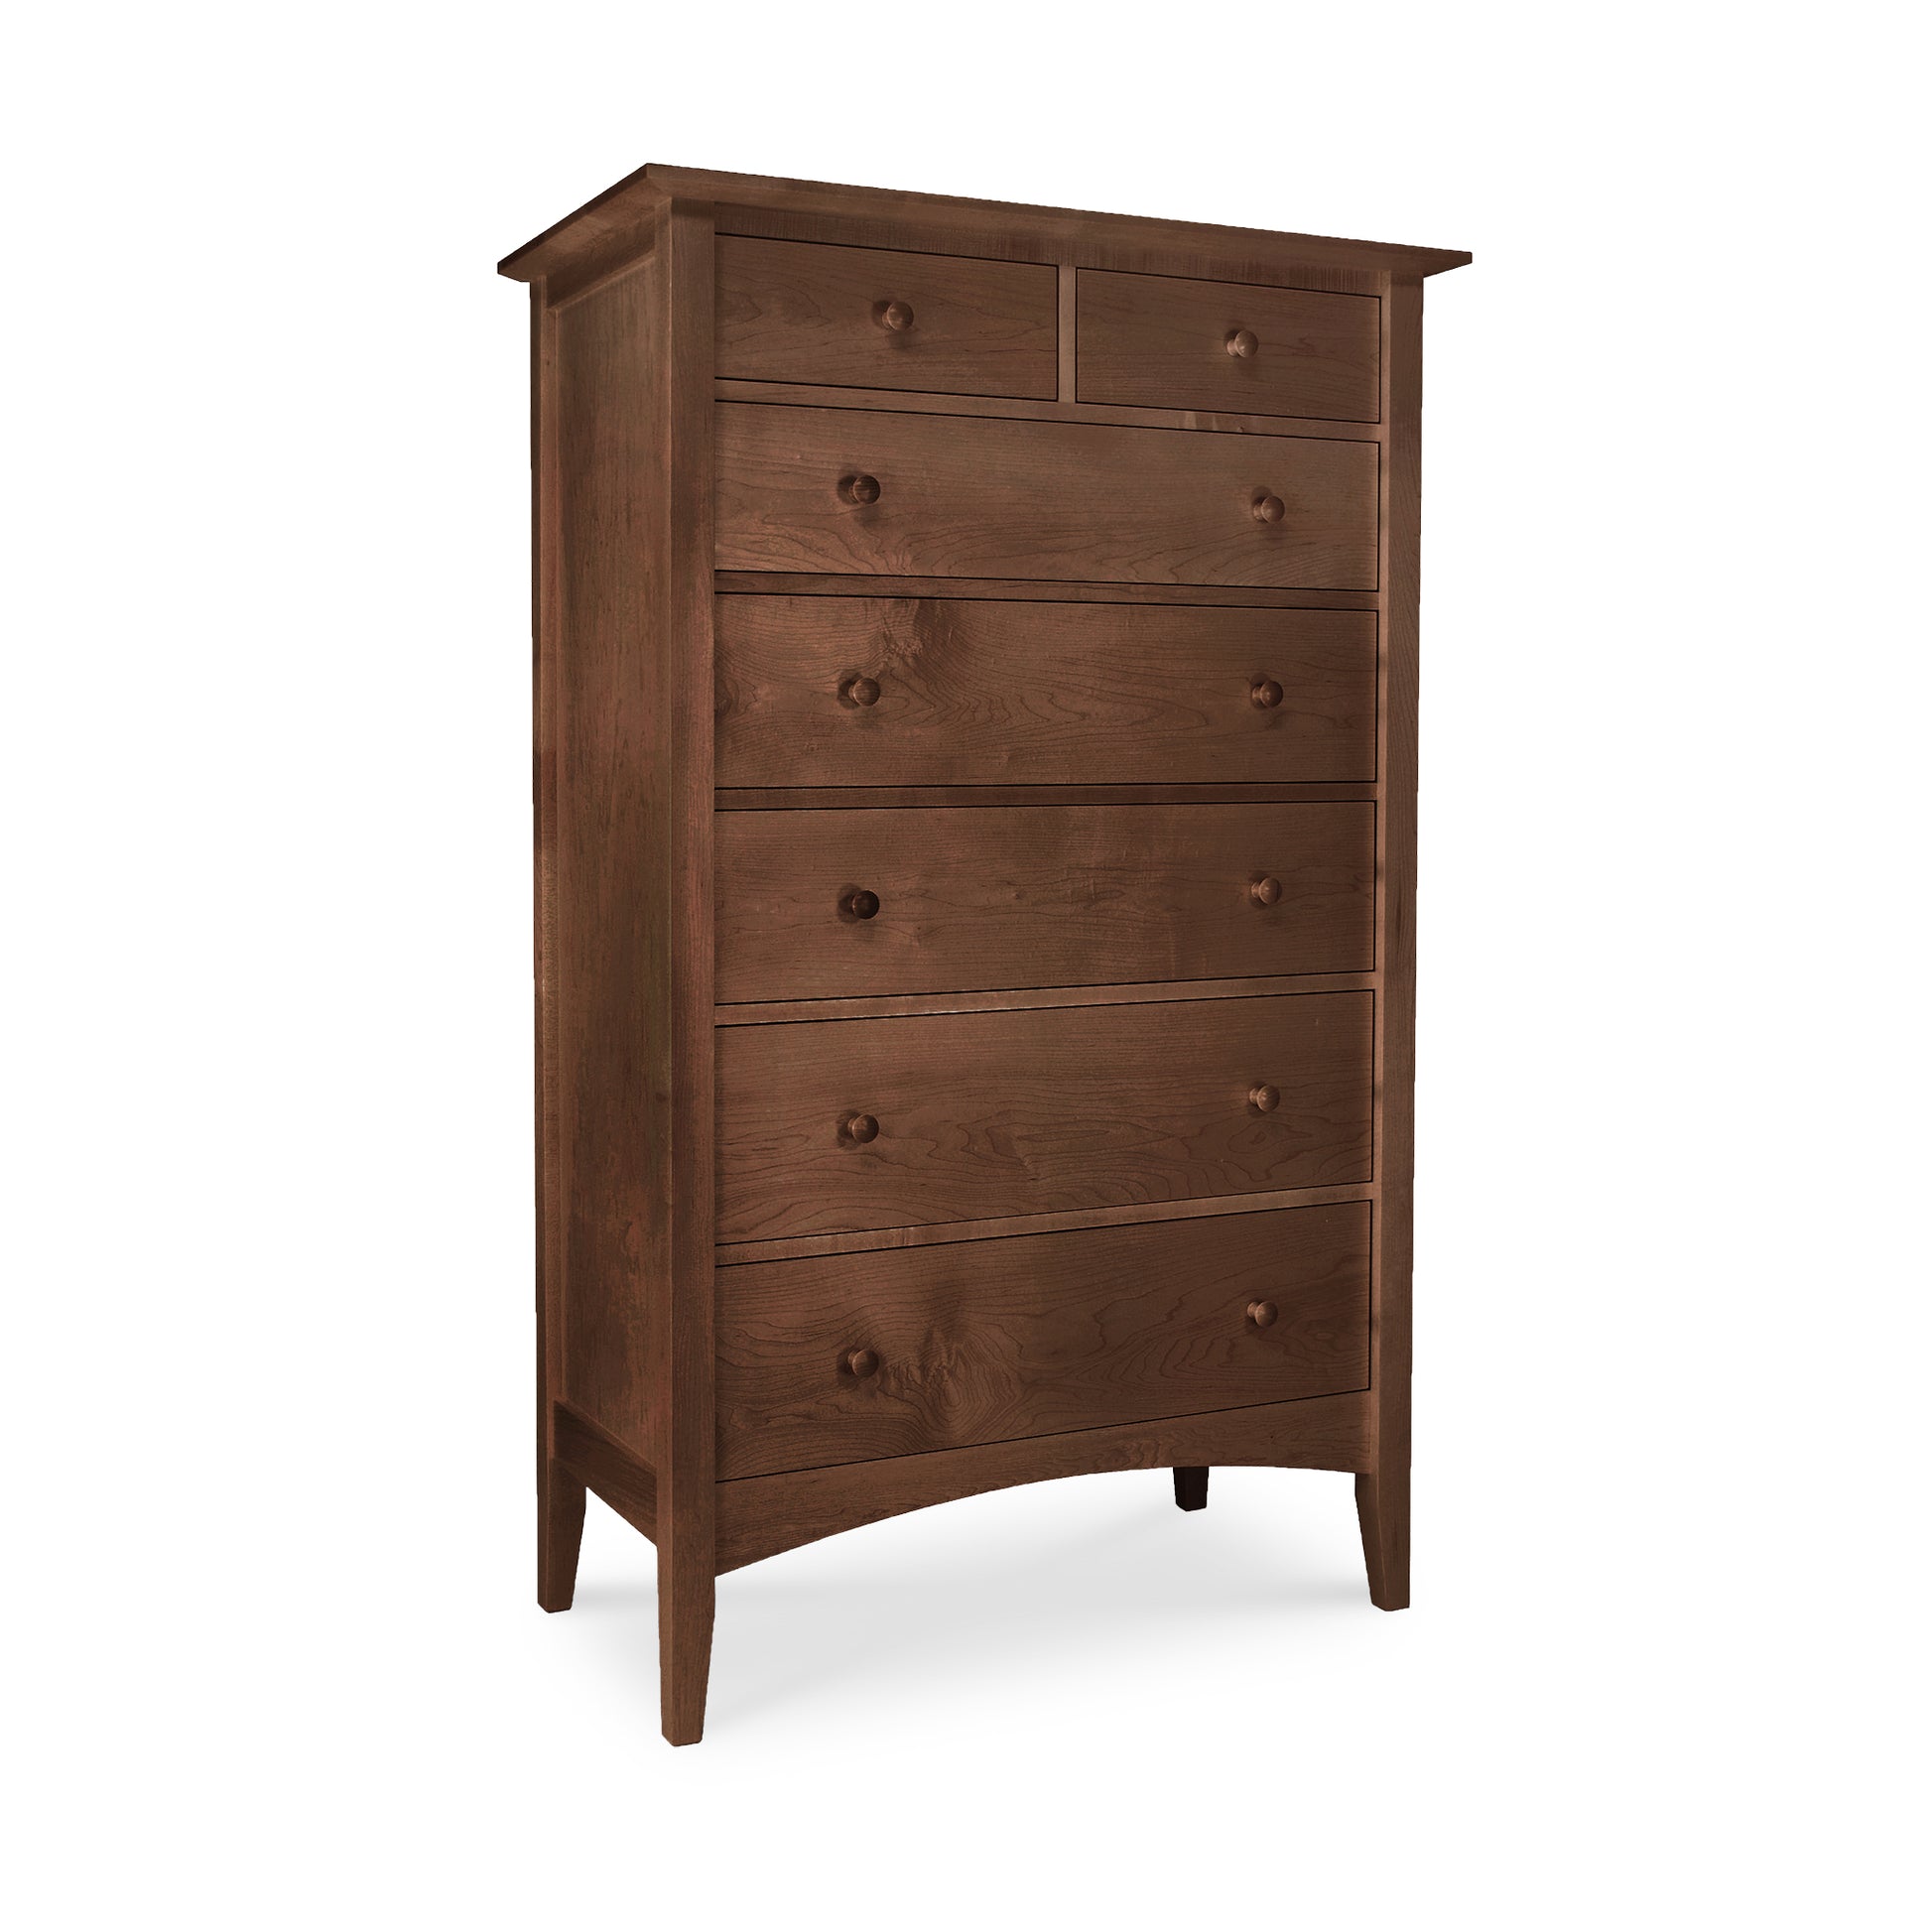 An eco-friendly American Shaker 7-Drawer Chest by Maple Corner Woodworks, featuring round knobs and standing on four tapered legs, isolated on a white background.